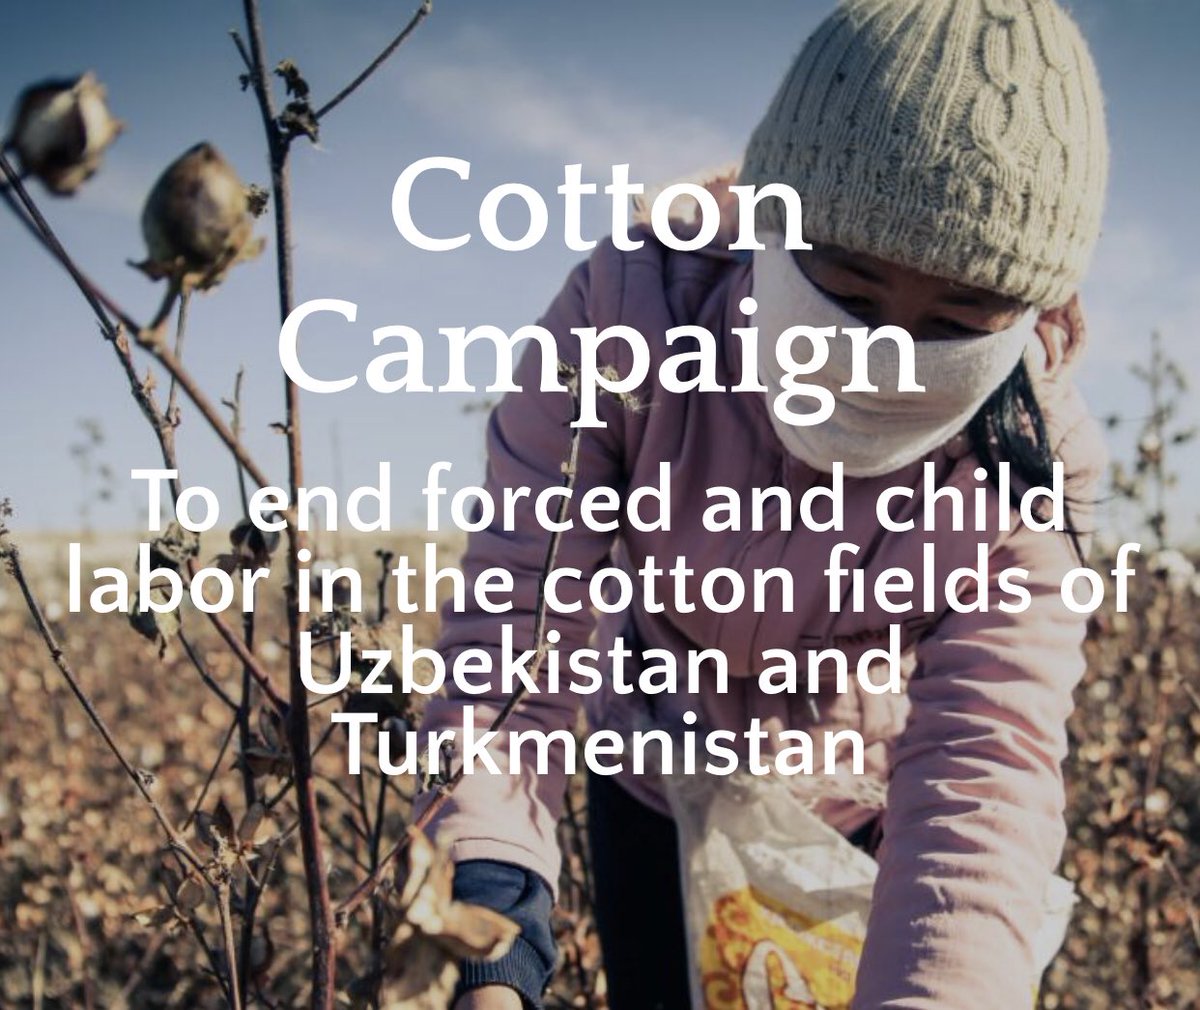 But slowly, and despite all the odds, the  @cottoncampaign (which includes both  @CrisisGroup and  @hrw) started to take off.  http://www.cottoncampaign.org  5/